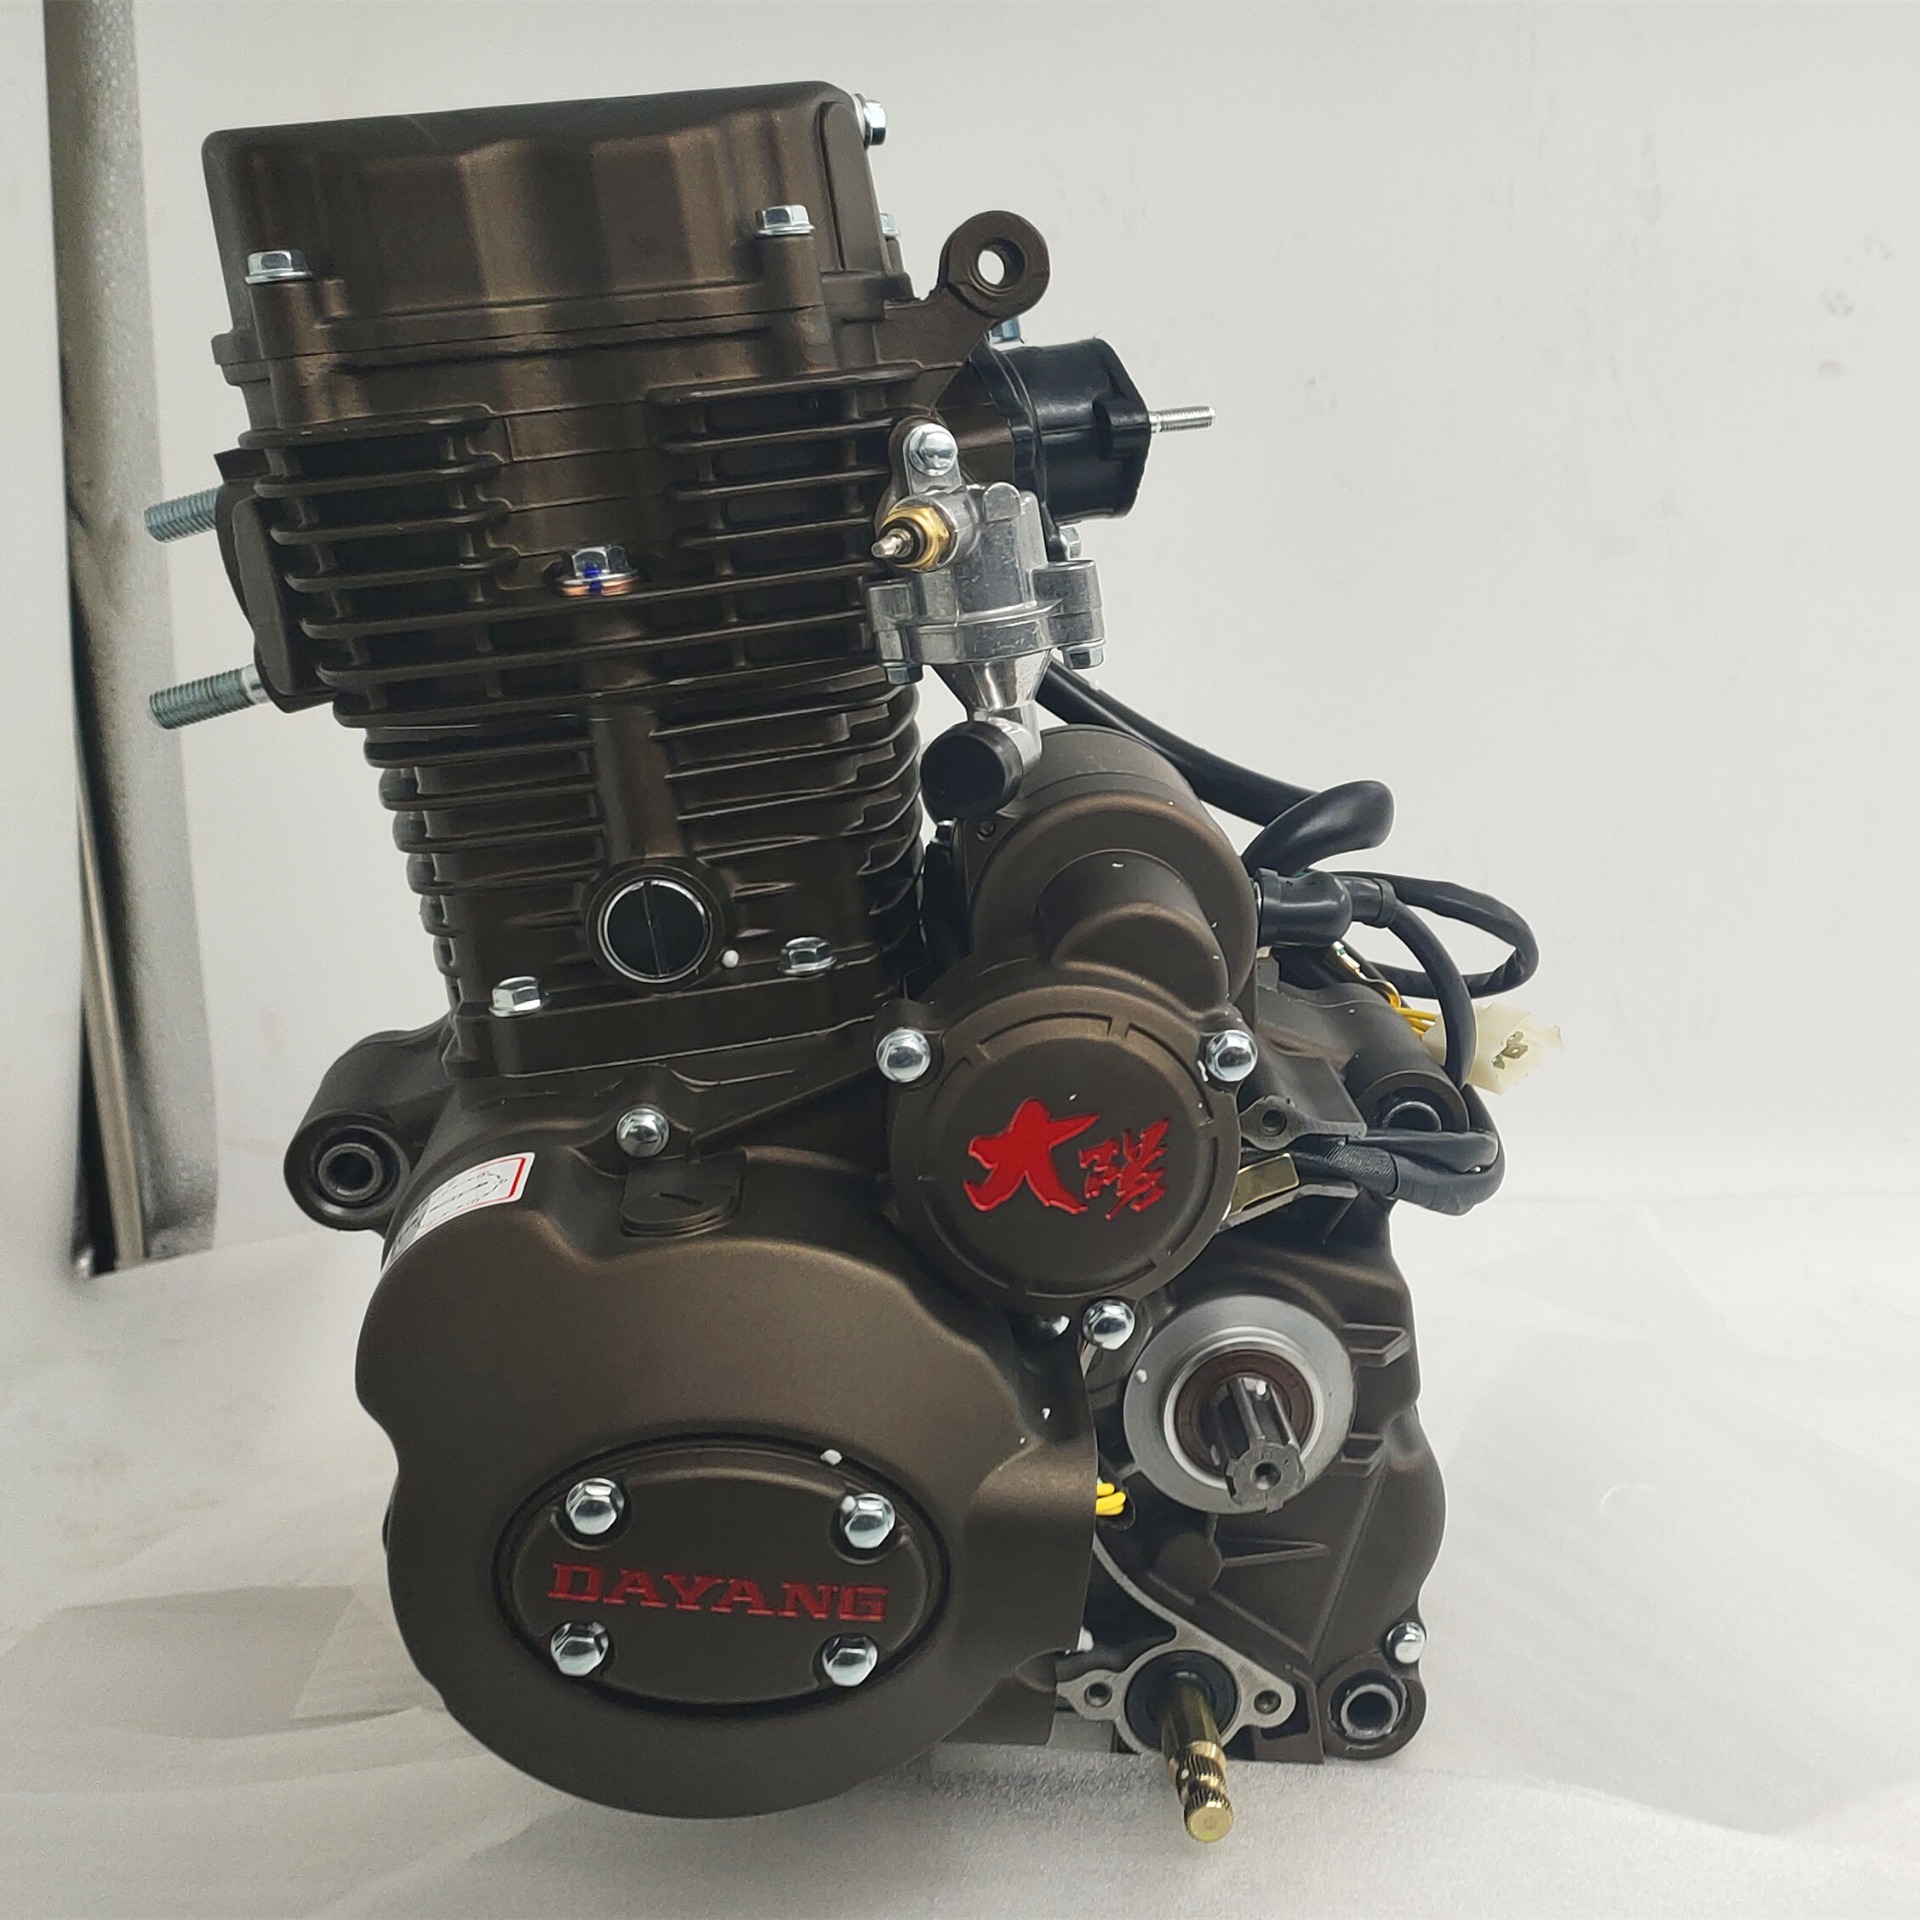 CG200 water cooled Sufficient power gasoline engine Tricycle DAYANG brand three wheels motorcycle engine assembly